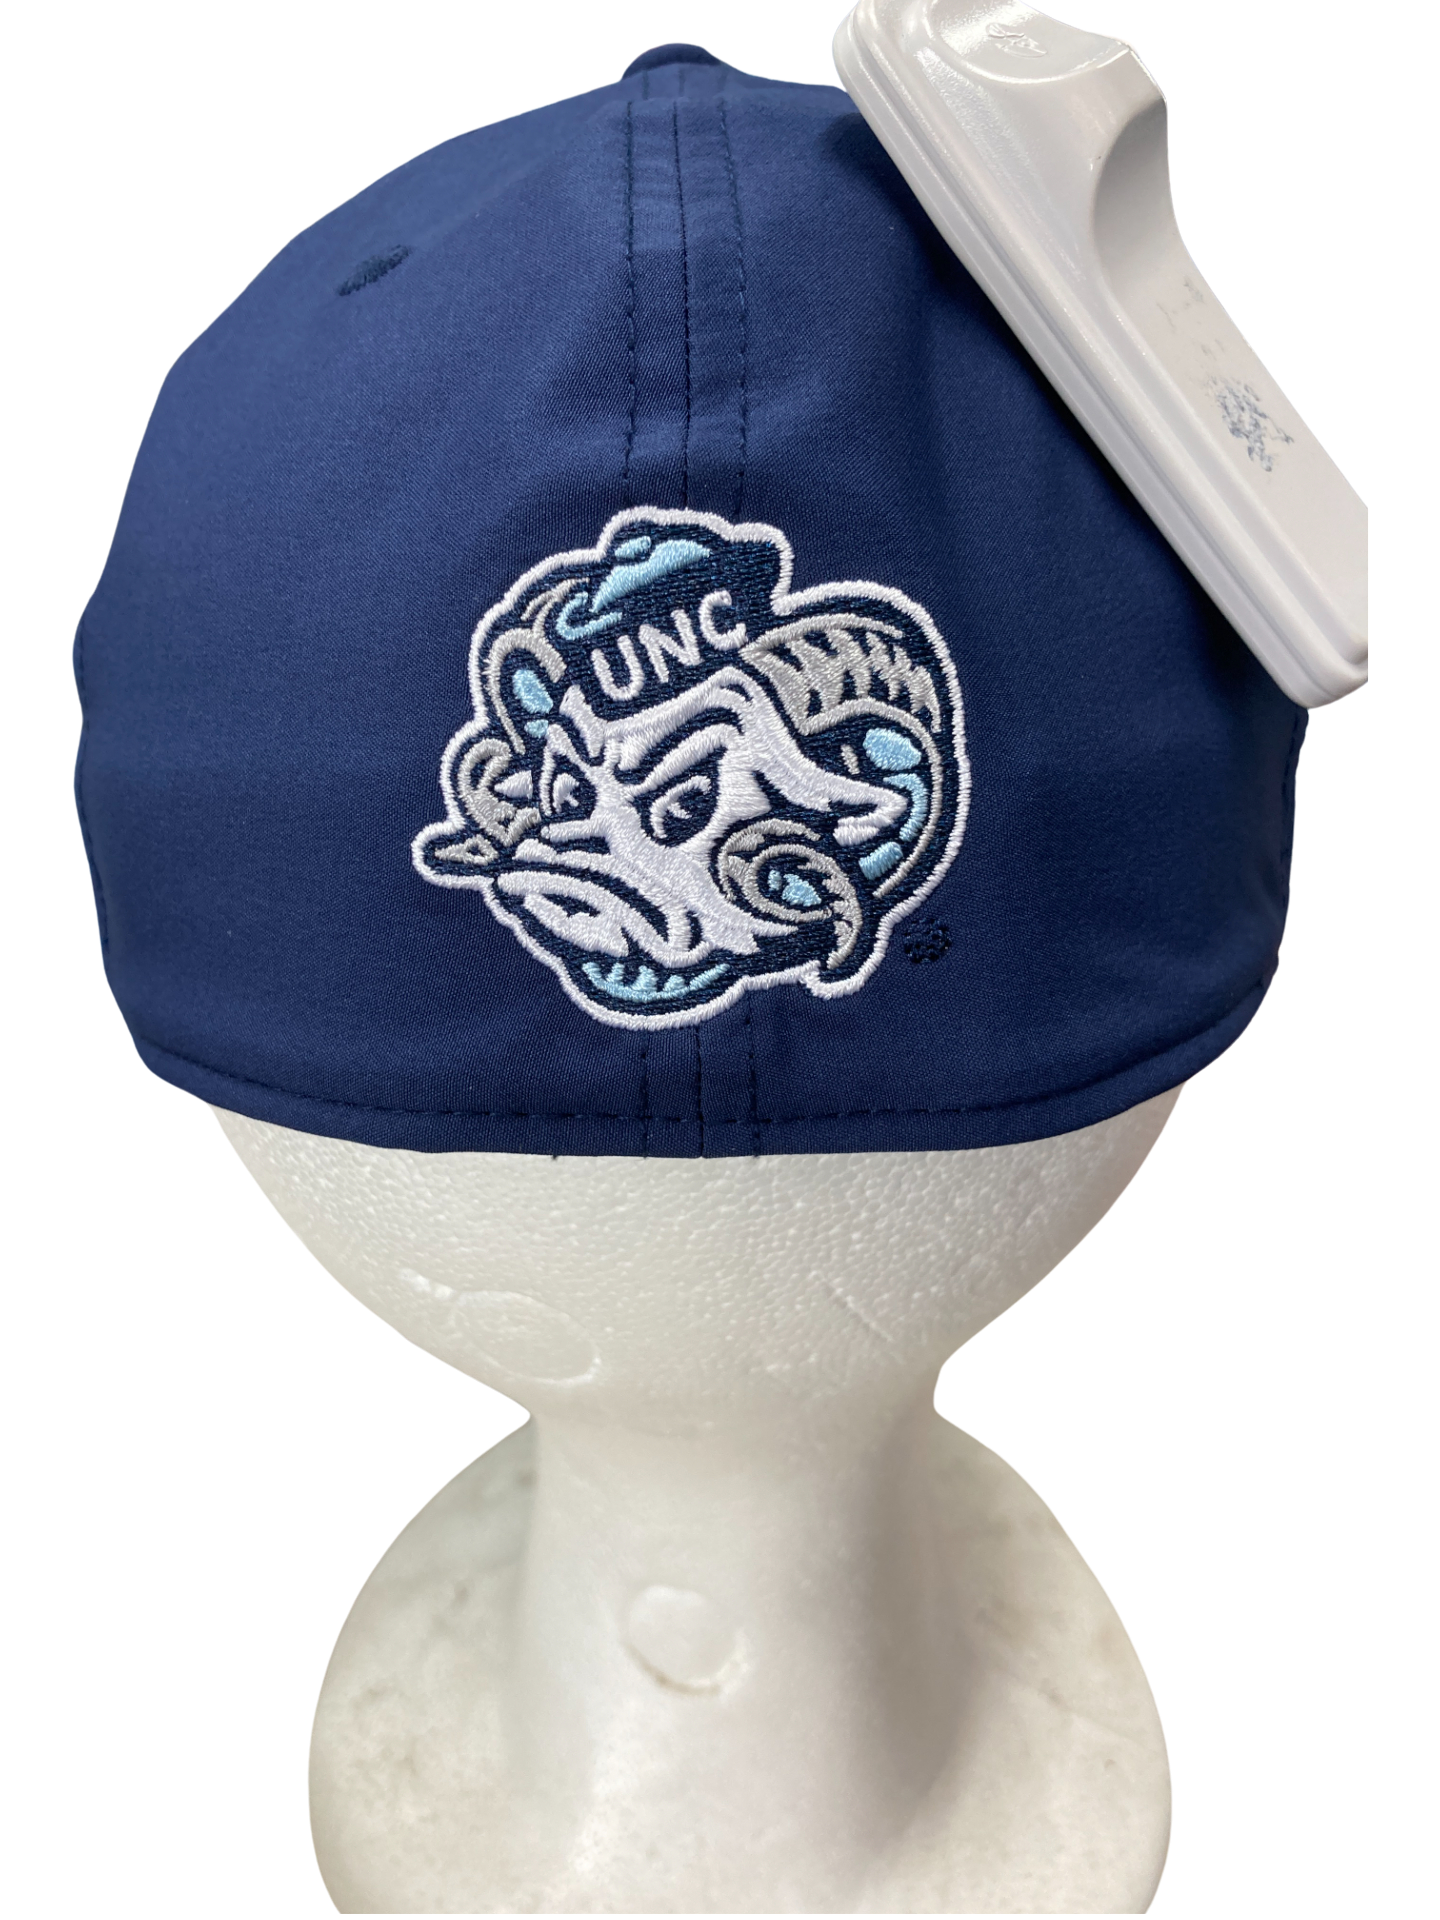 UNC Traditional Hat